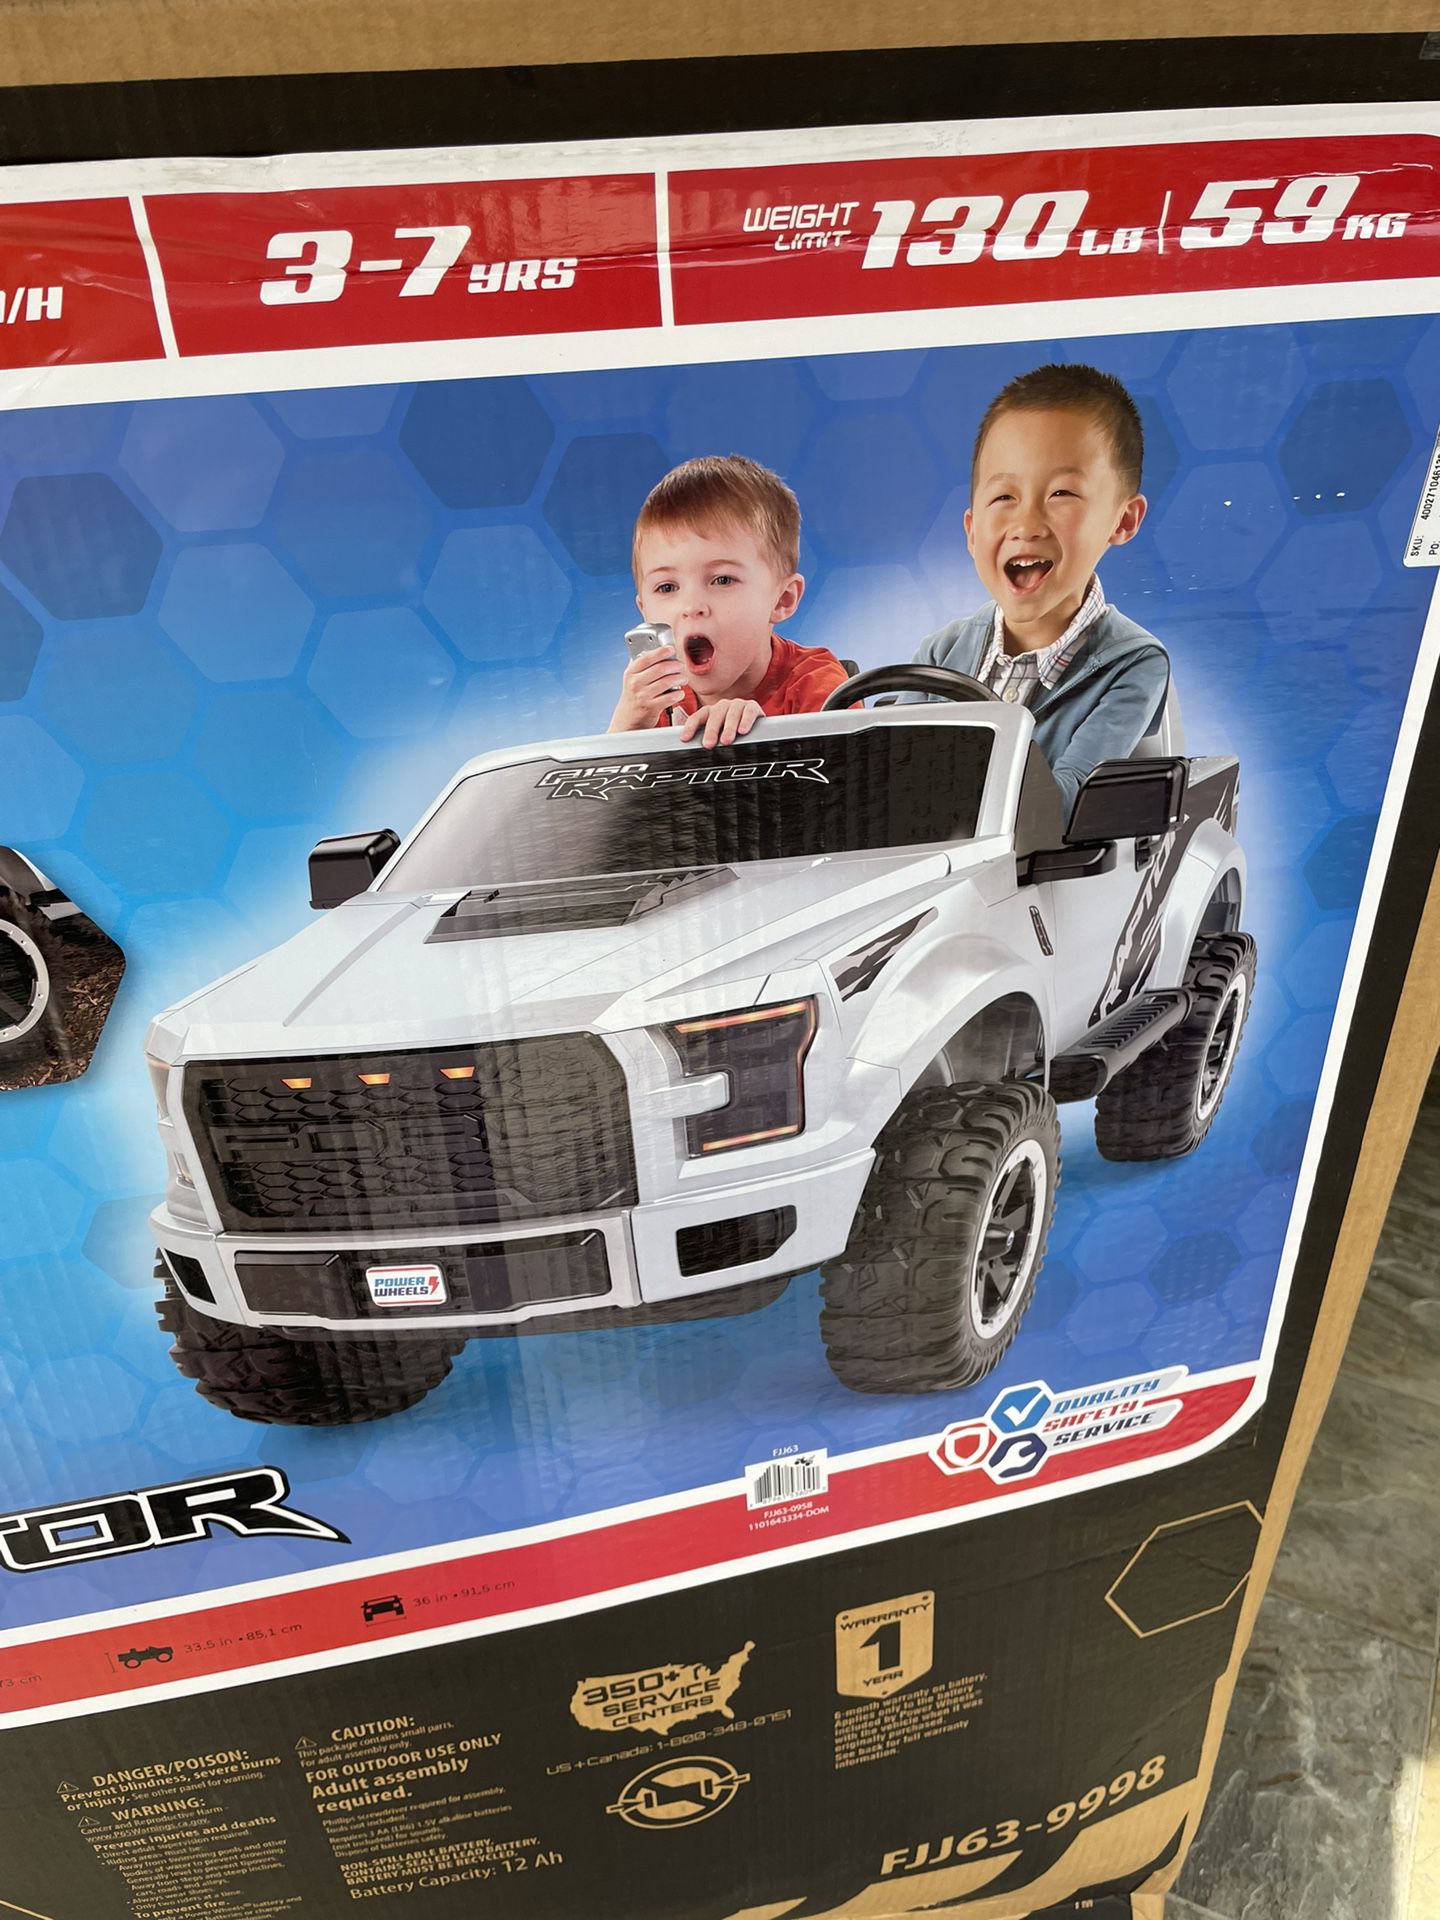 Power Wheels F-150 Raptor 2 Seater Ride On Toy